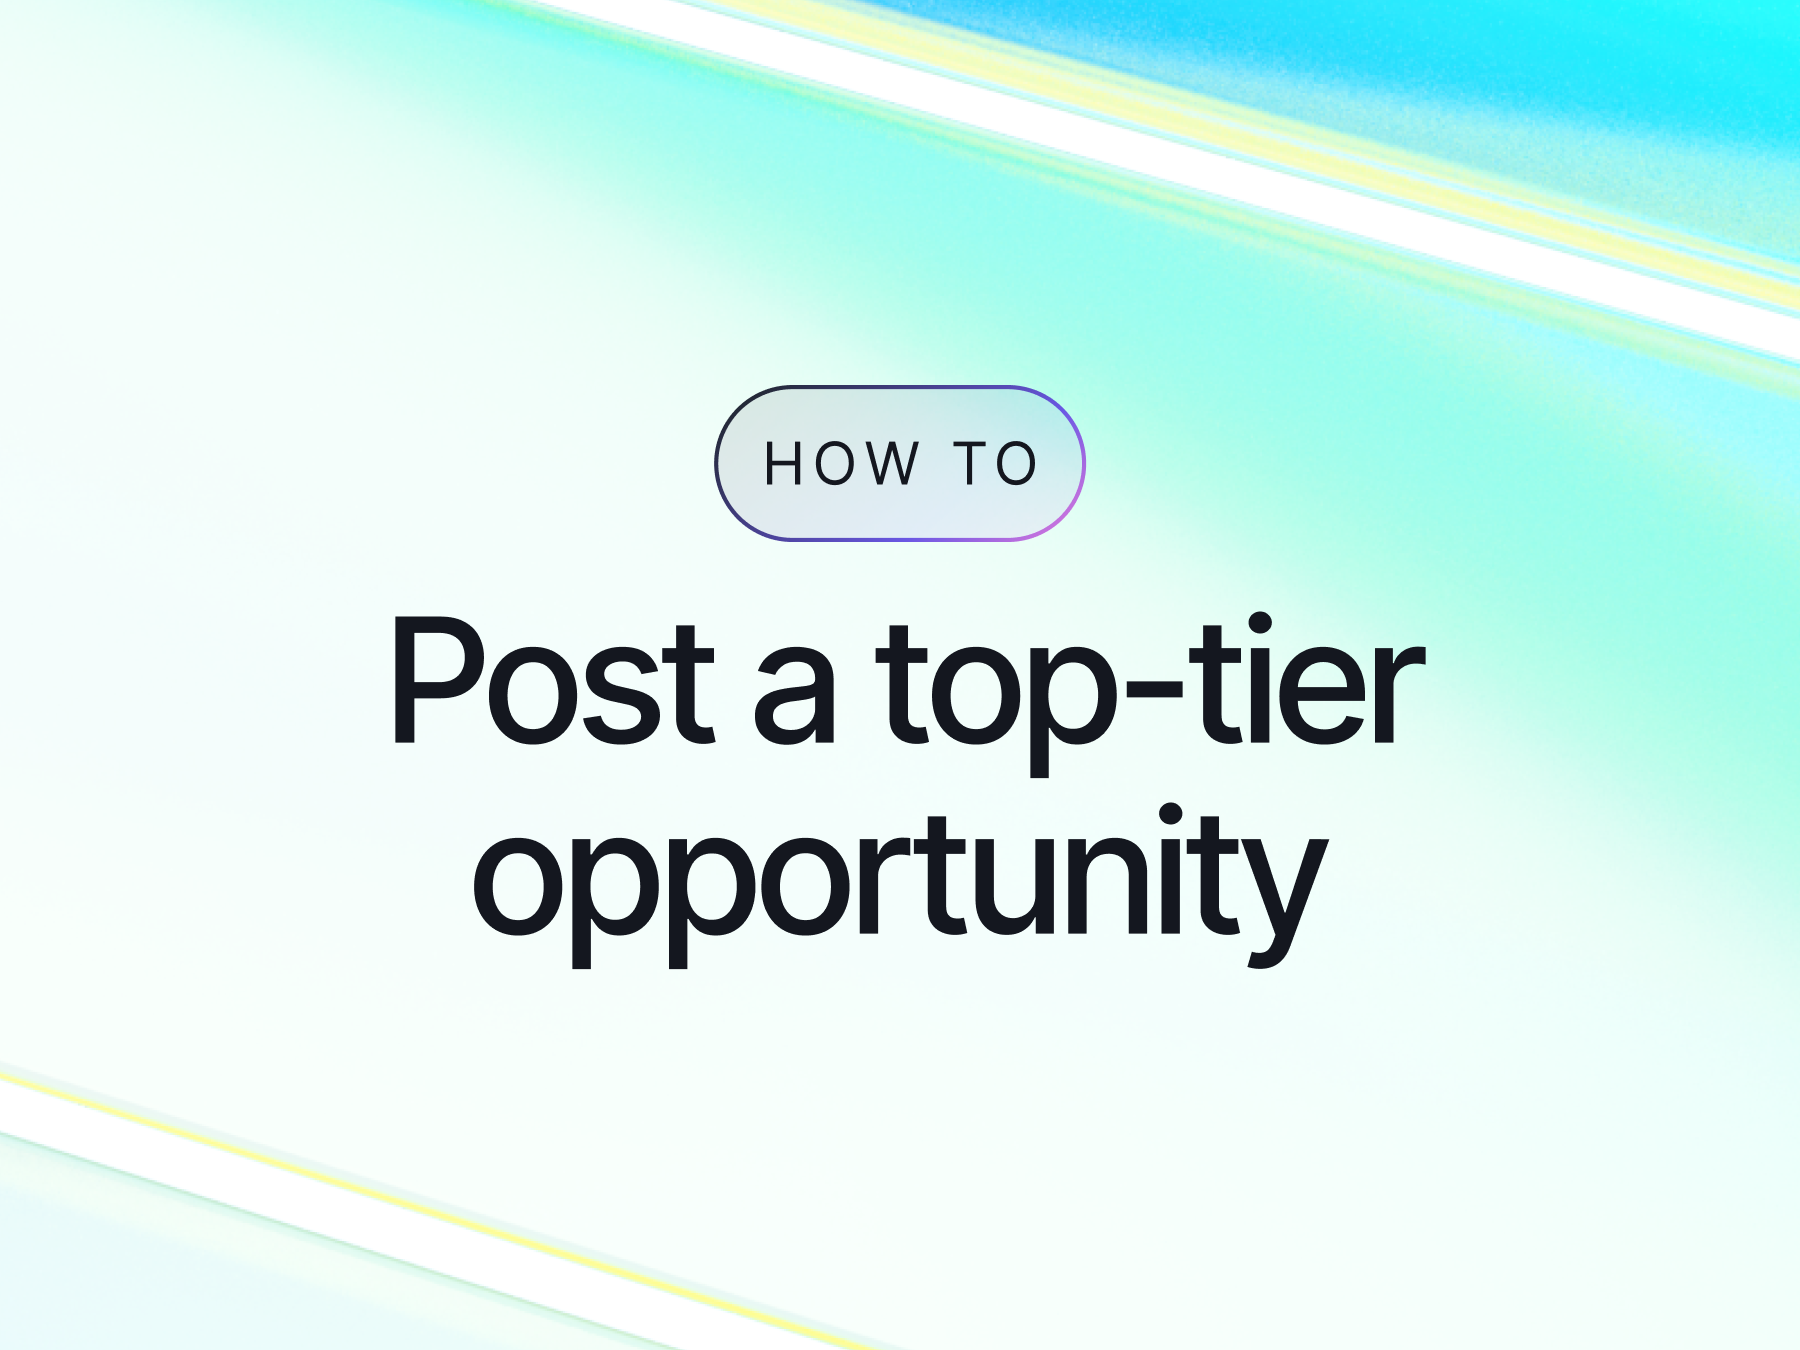 How to Post a Top-Tier Opportunity